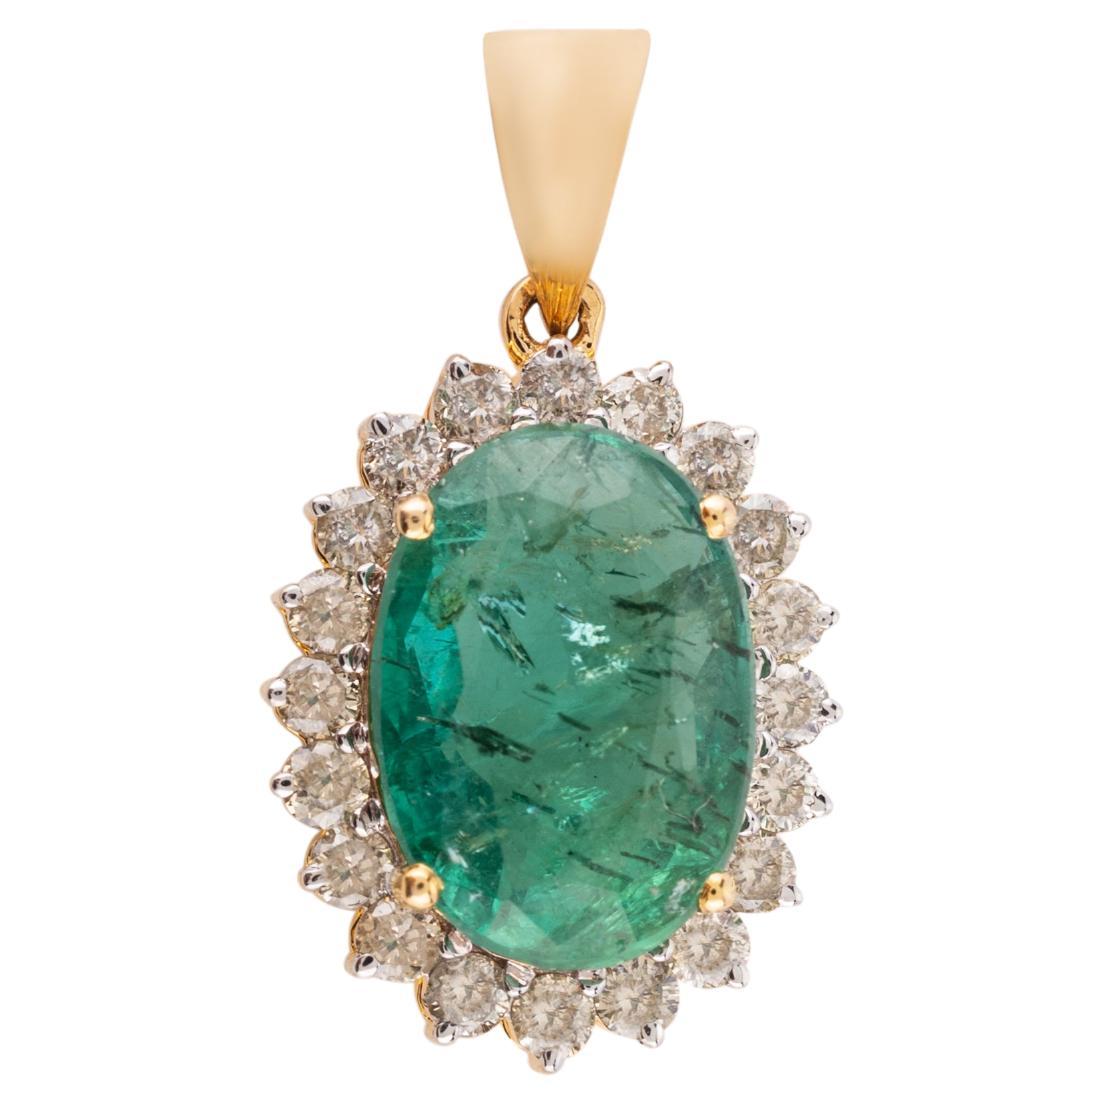 4.2 Carat Oval Emerald Diamond Halo Pendant for Gift in 14k Solid Yellow Gold